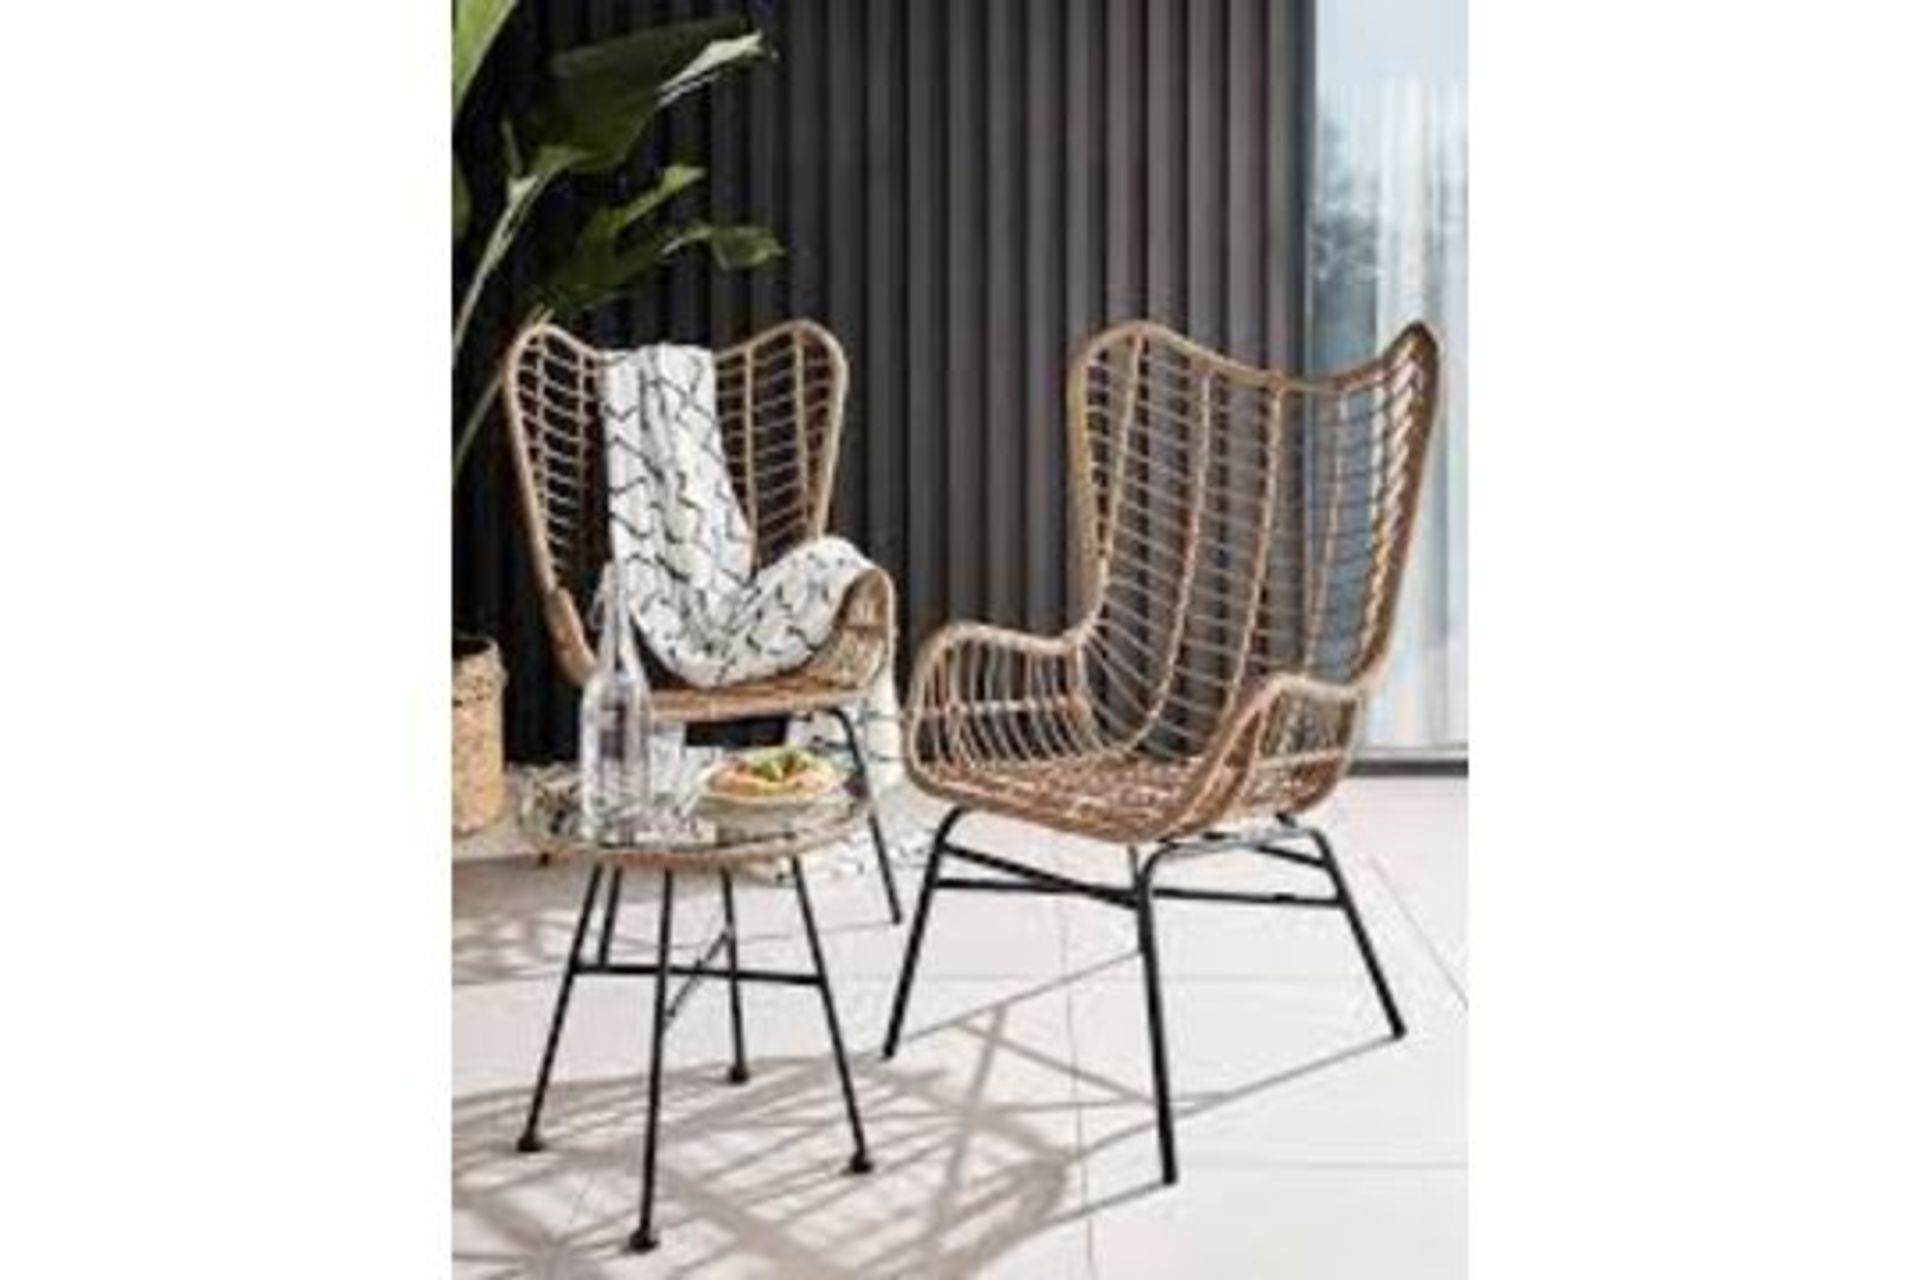 Miami Bistro Lounge Set. - SR5. RRP £499.00. This Miami Bistro Lounge set complete with 2 chairs and